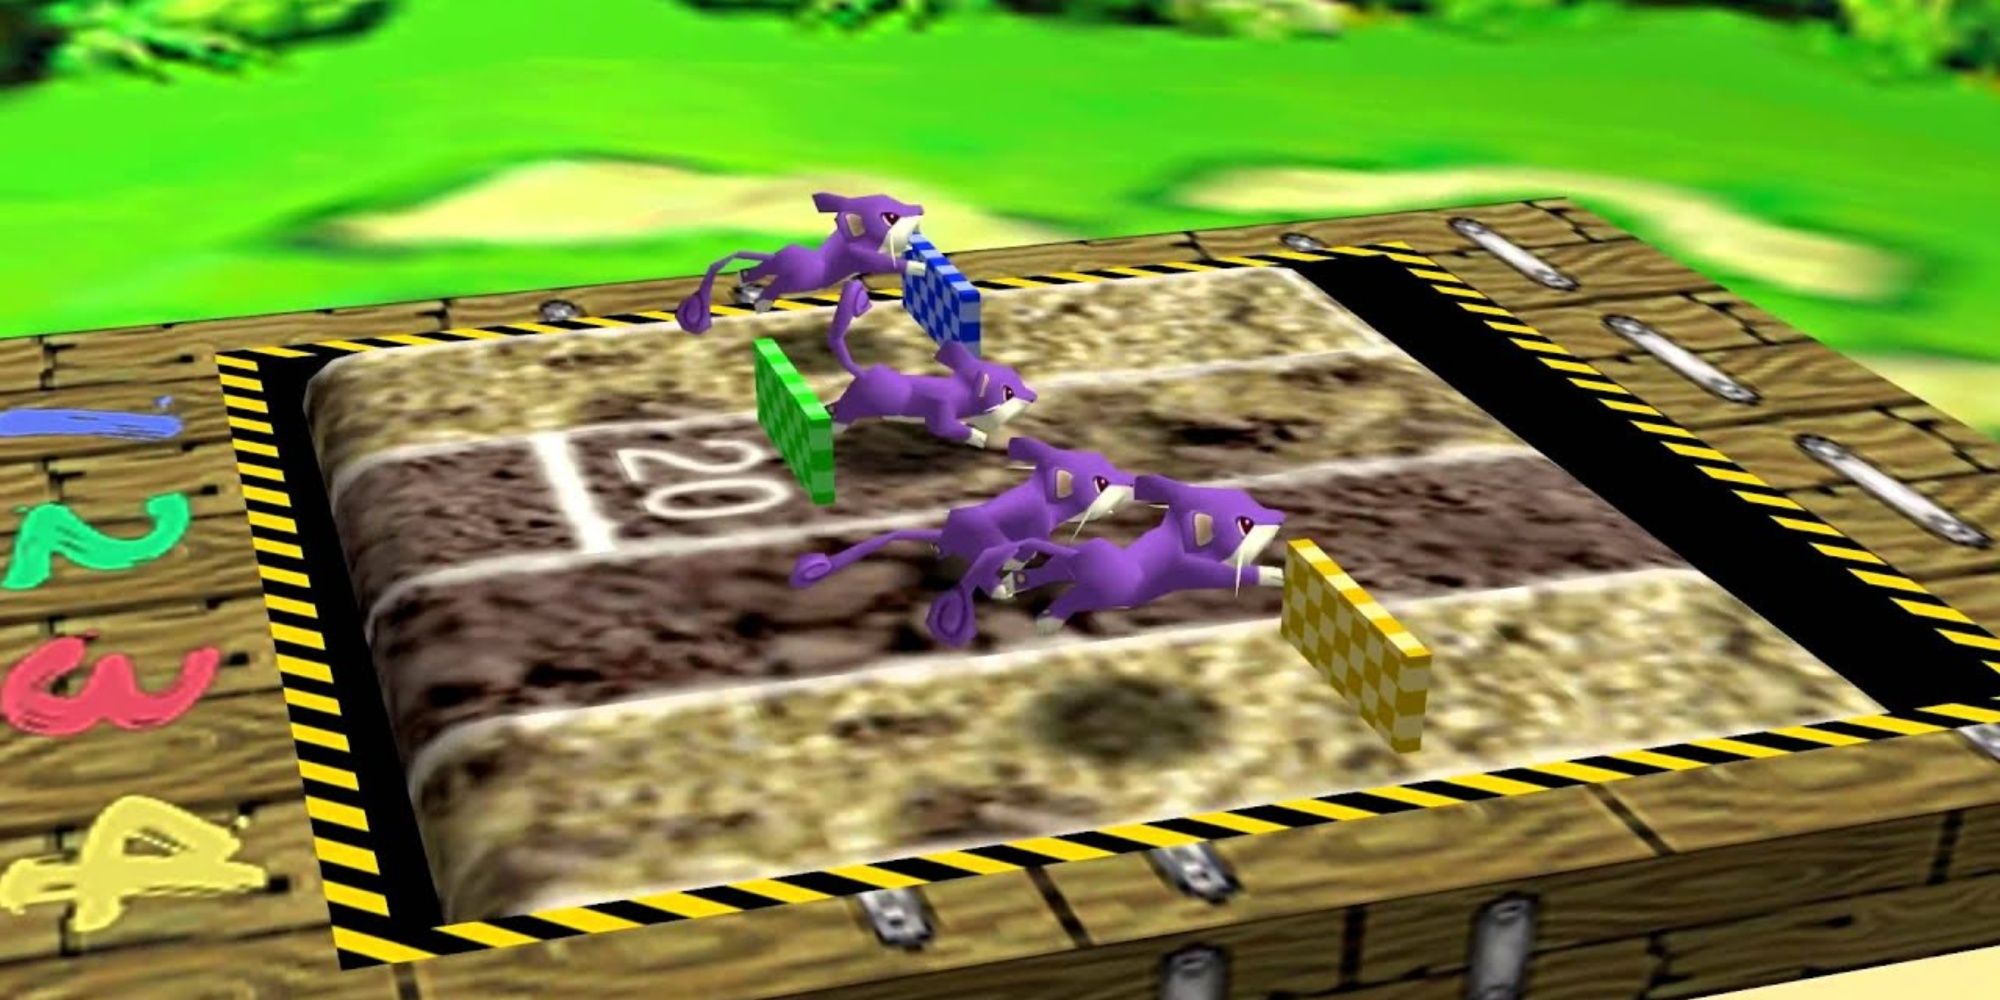 Four purple rats on a treadmill, jumping over fences on fake ground